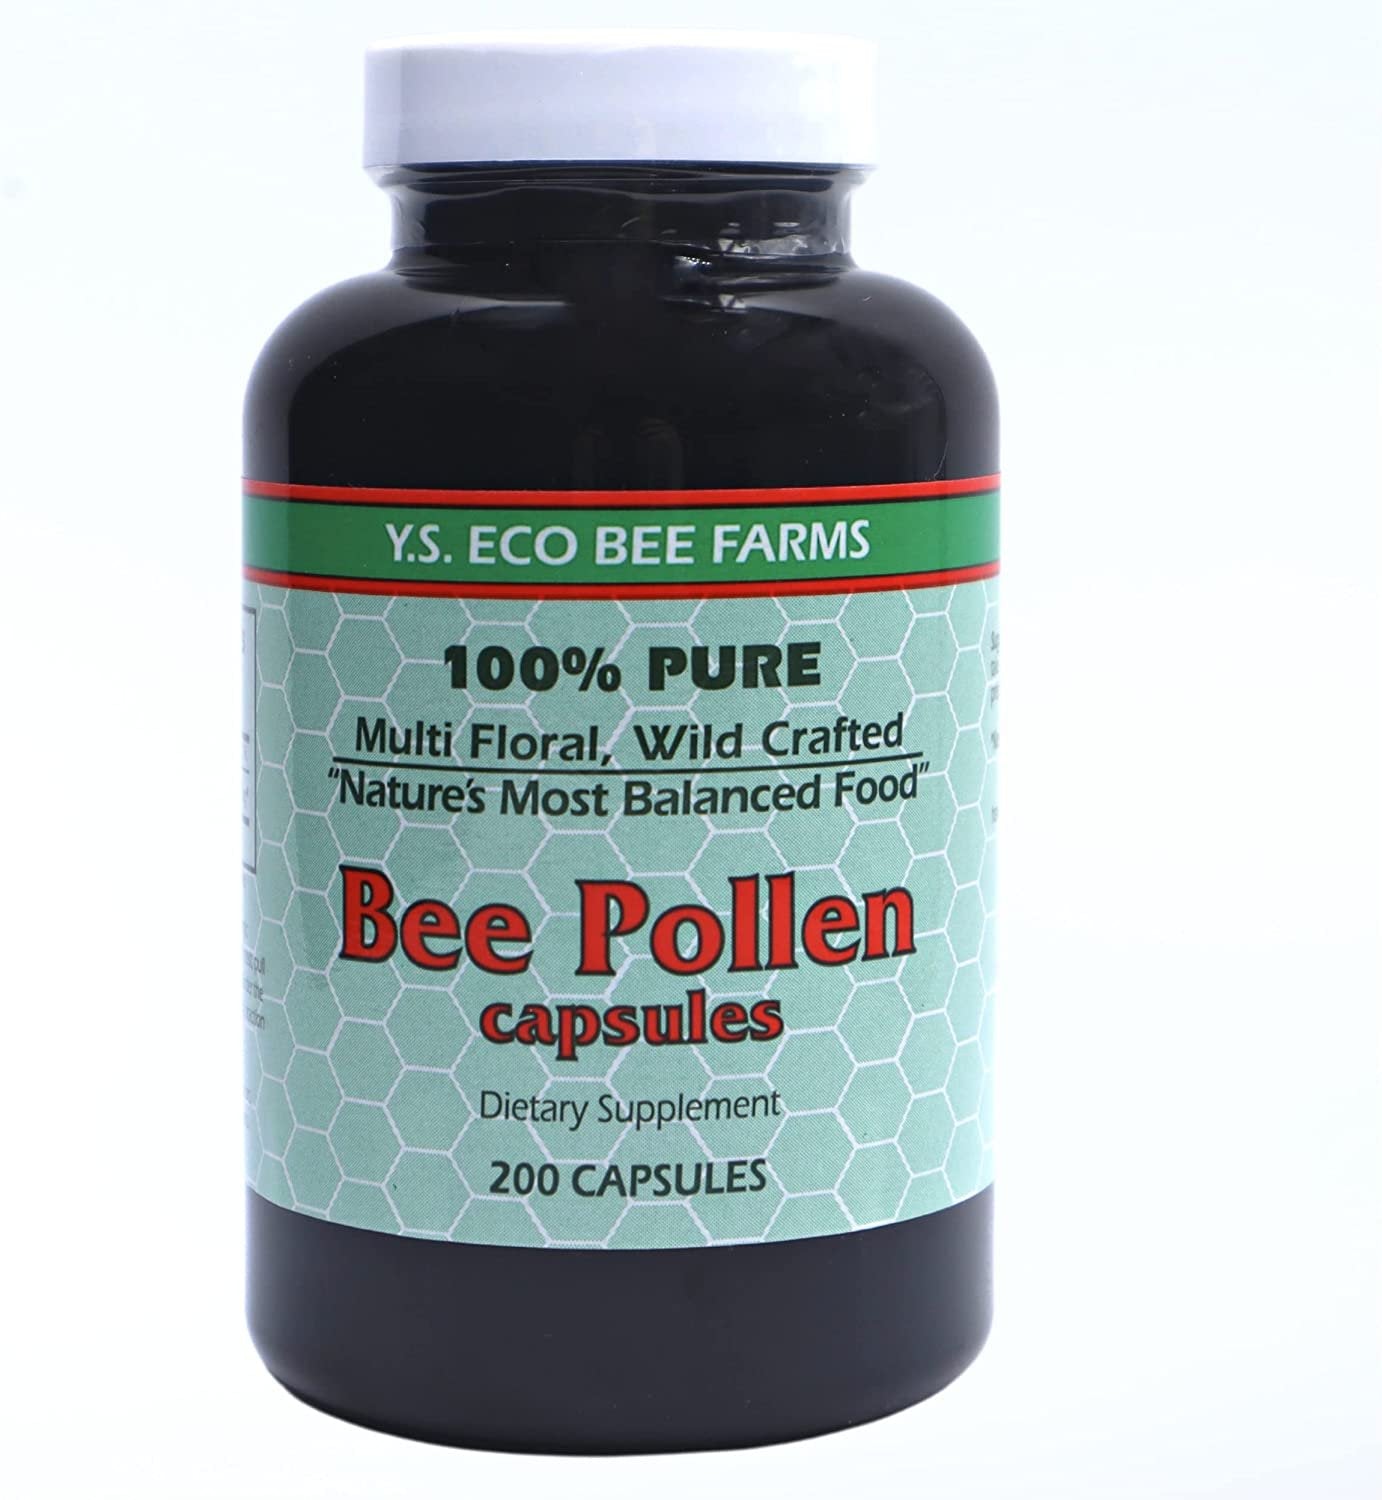 Y.S. Eco Bee Farms 100 Percent Pure Multi Floral, Wild Crafted Bee Pollen Capsules - 200 Count - Organic Bee Pollen Vitamin Supplements for Optimal Health and Wellness, 730